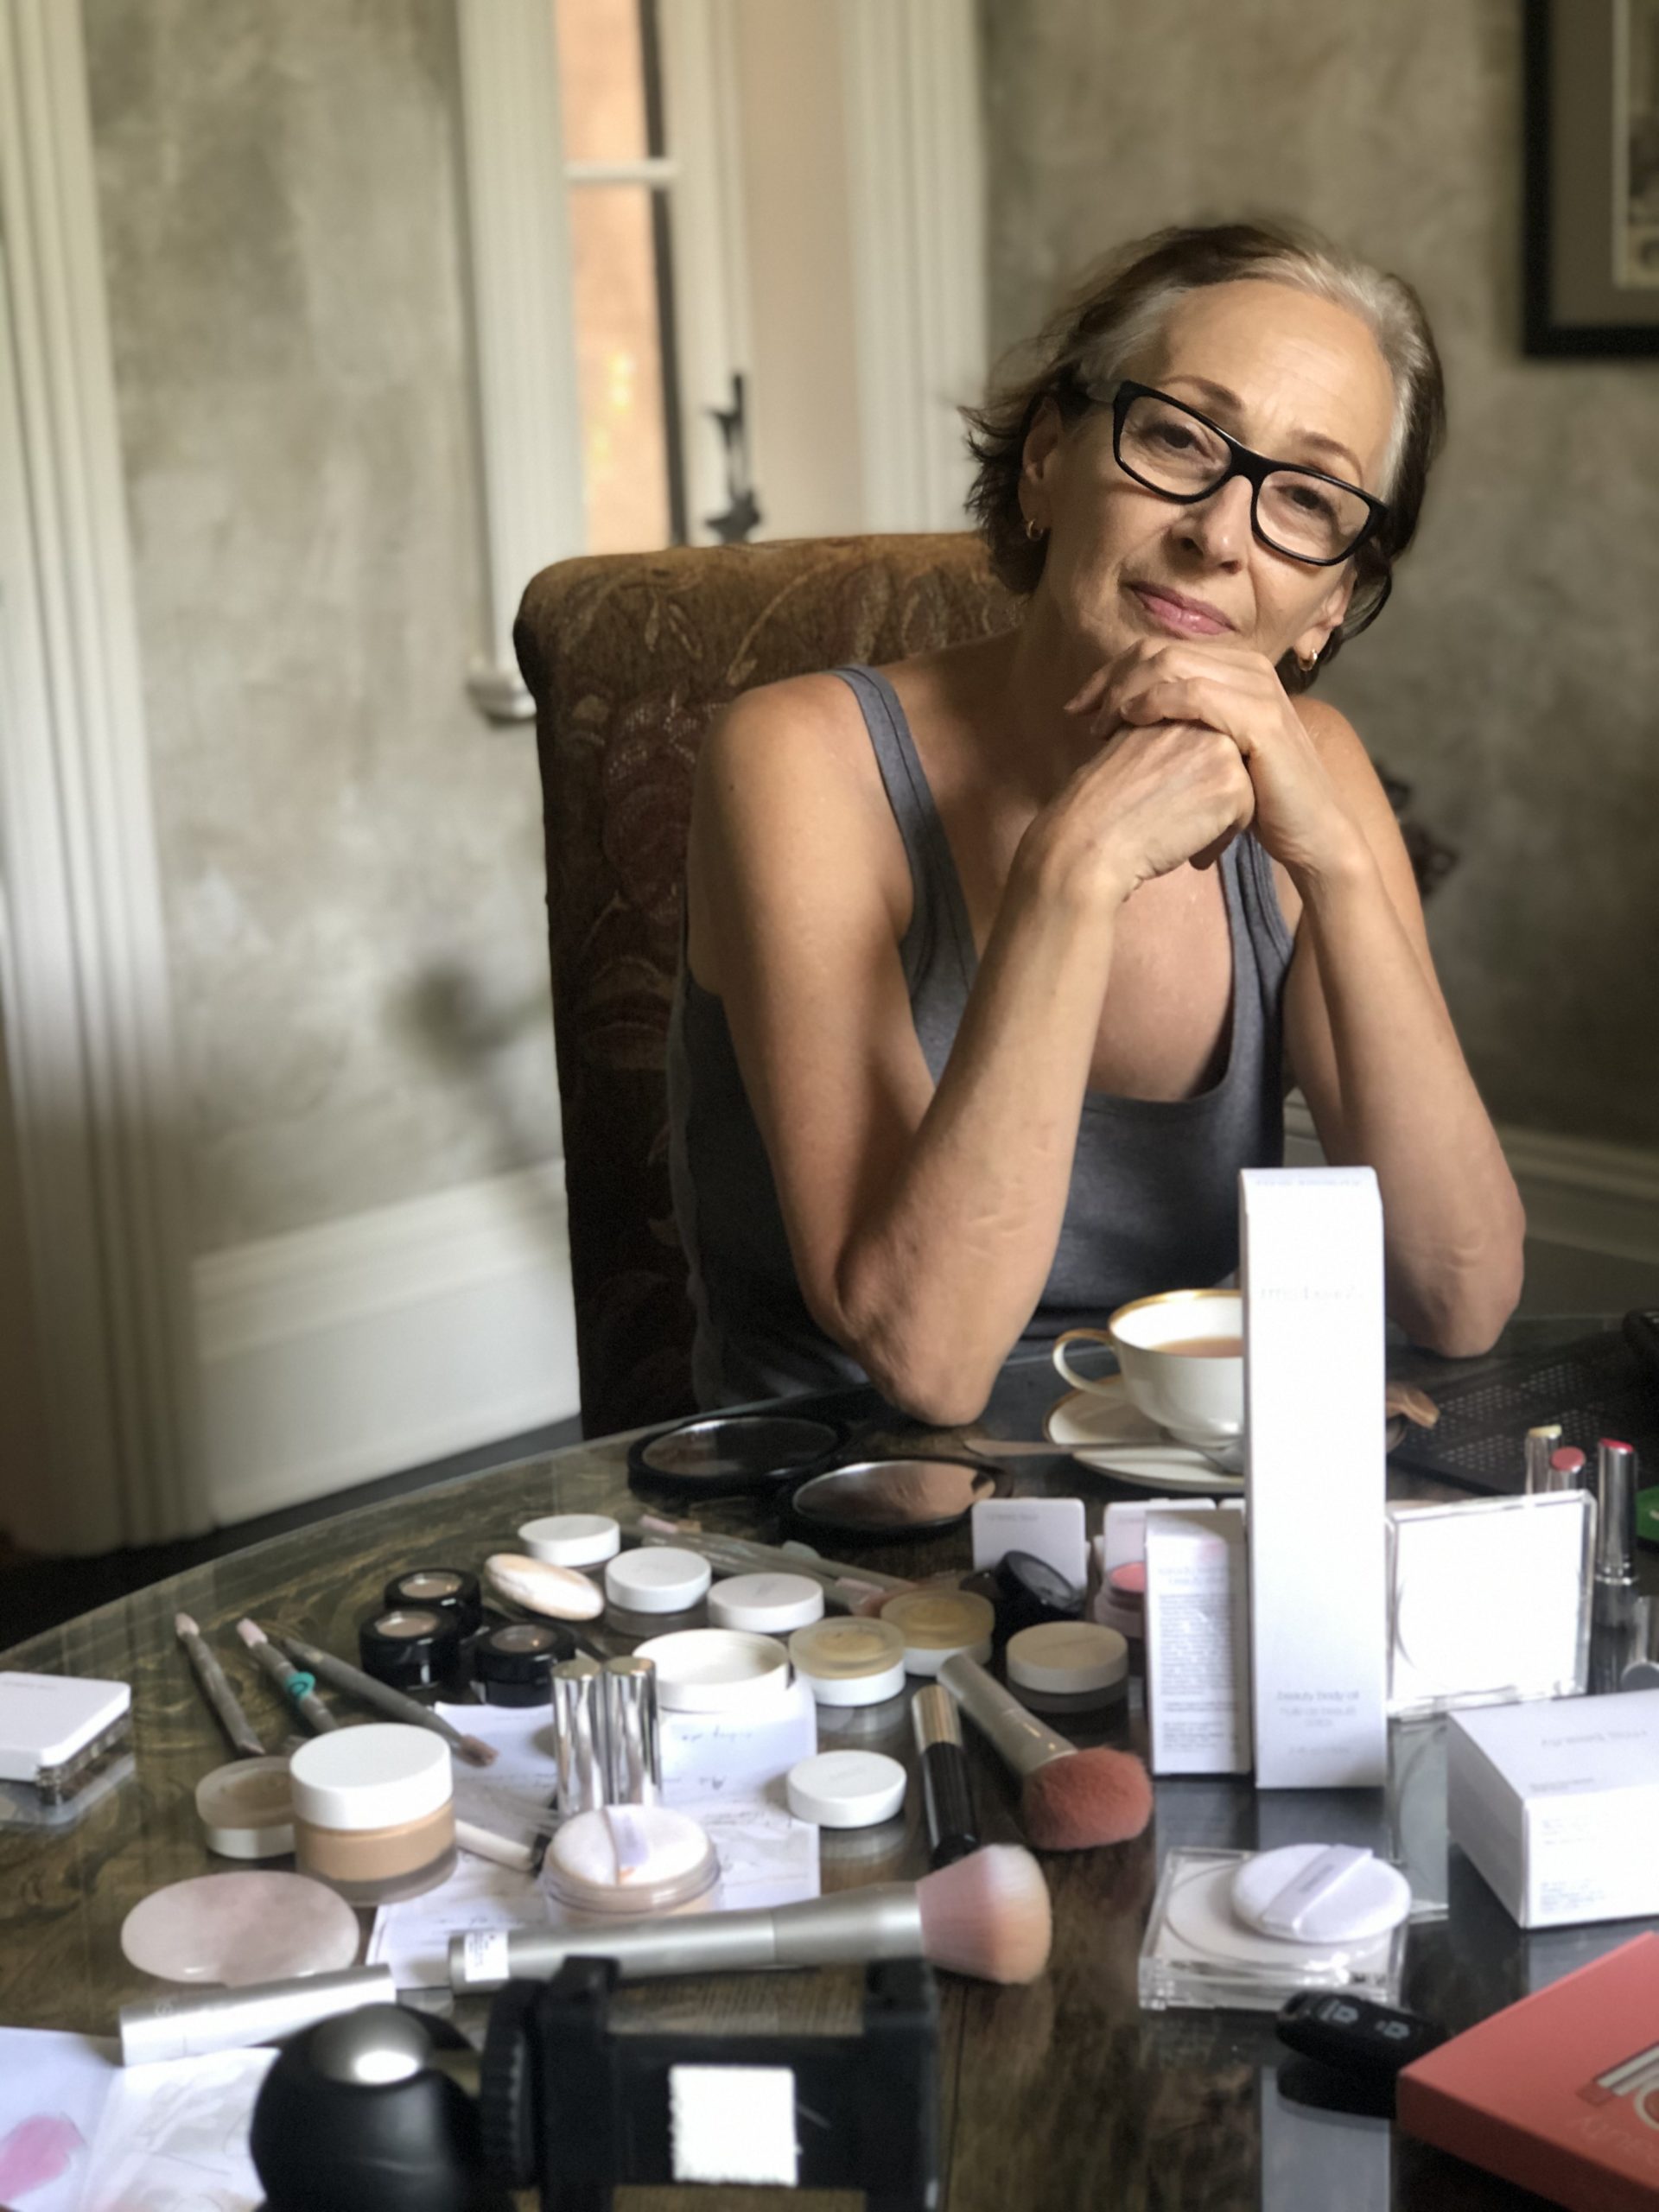 Brig præst klynke Why RMS Beauty Founder Rose-Marie Swift Has No Time for Investors